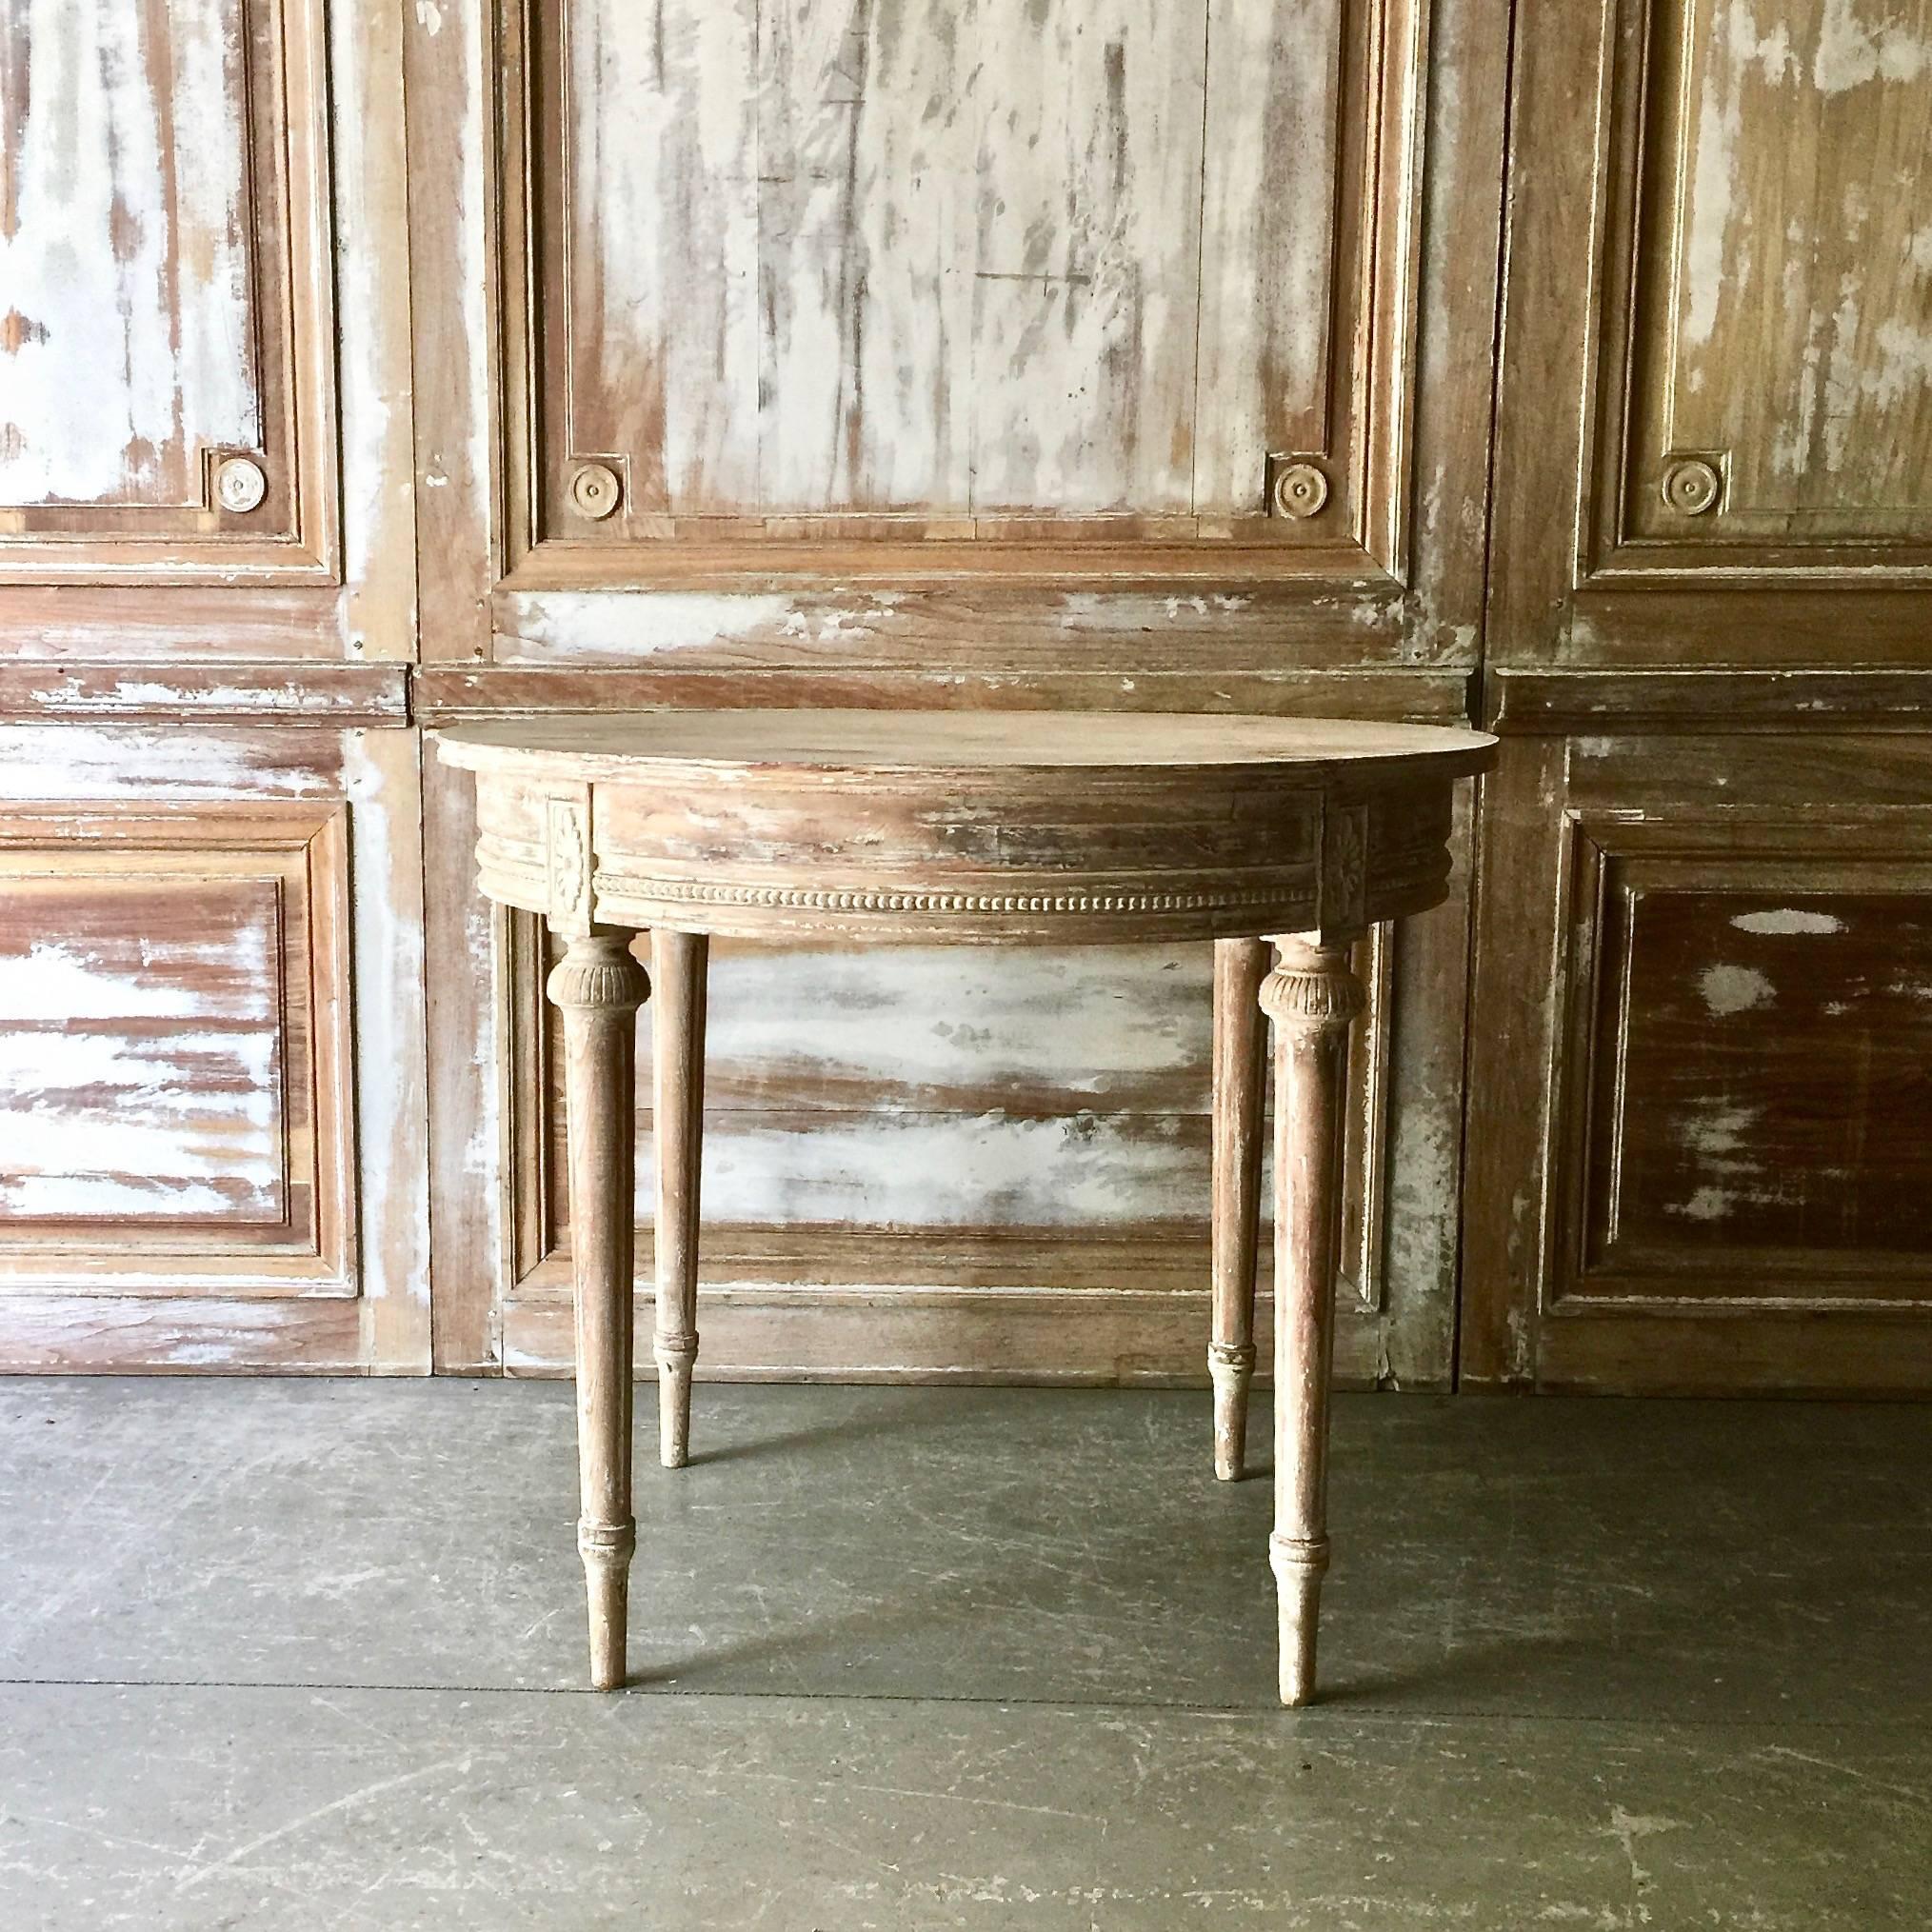 19th century classically elegant Swedish Gustavian style round table with simple bead string carved apron, richly carved tapering legs with florets, in time worn cream patina.
Sweden, circa 1880.
Here are few examples surprising pieces and